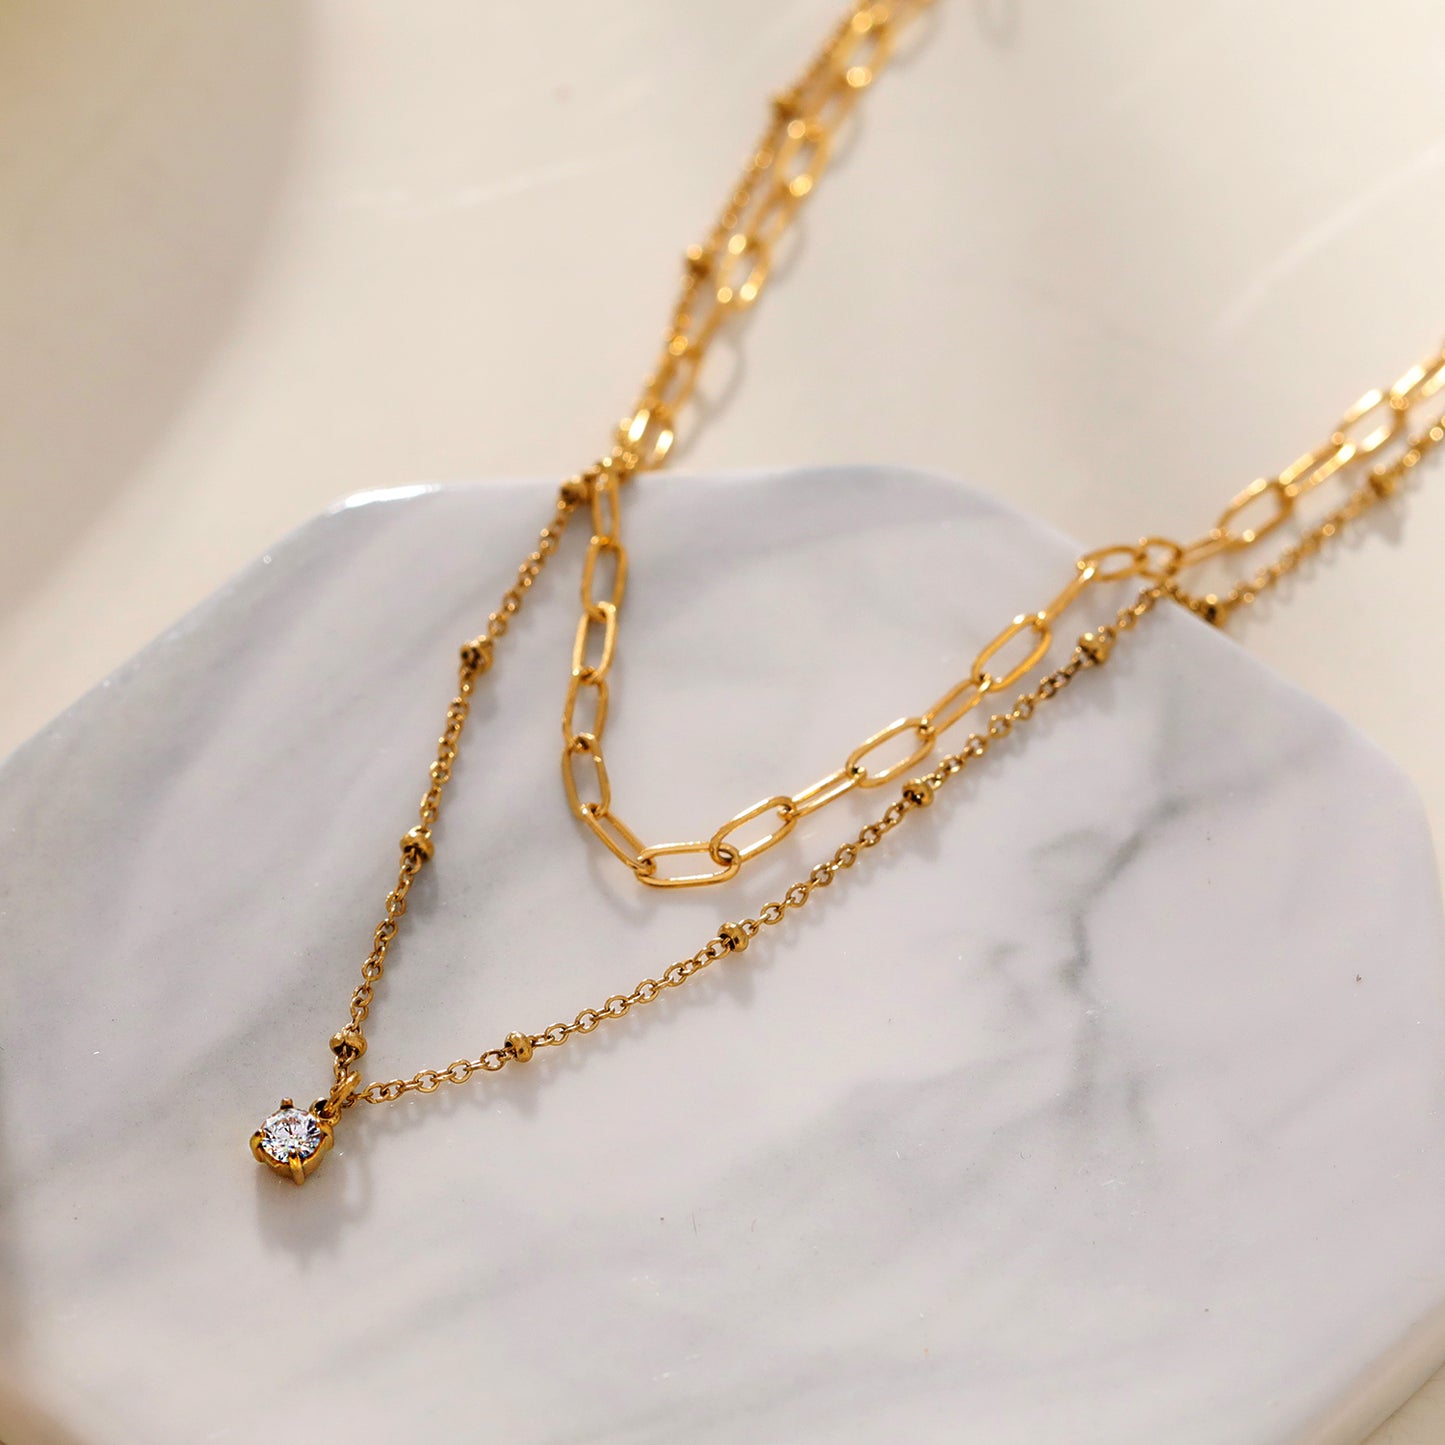 hackney-nine | hackneynine | Style KATERI 52205G Gold: Pre-Layered Chains Necklace with a Solitaire Zirconia Charm Pendant